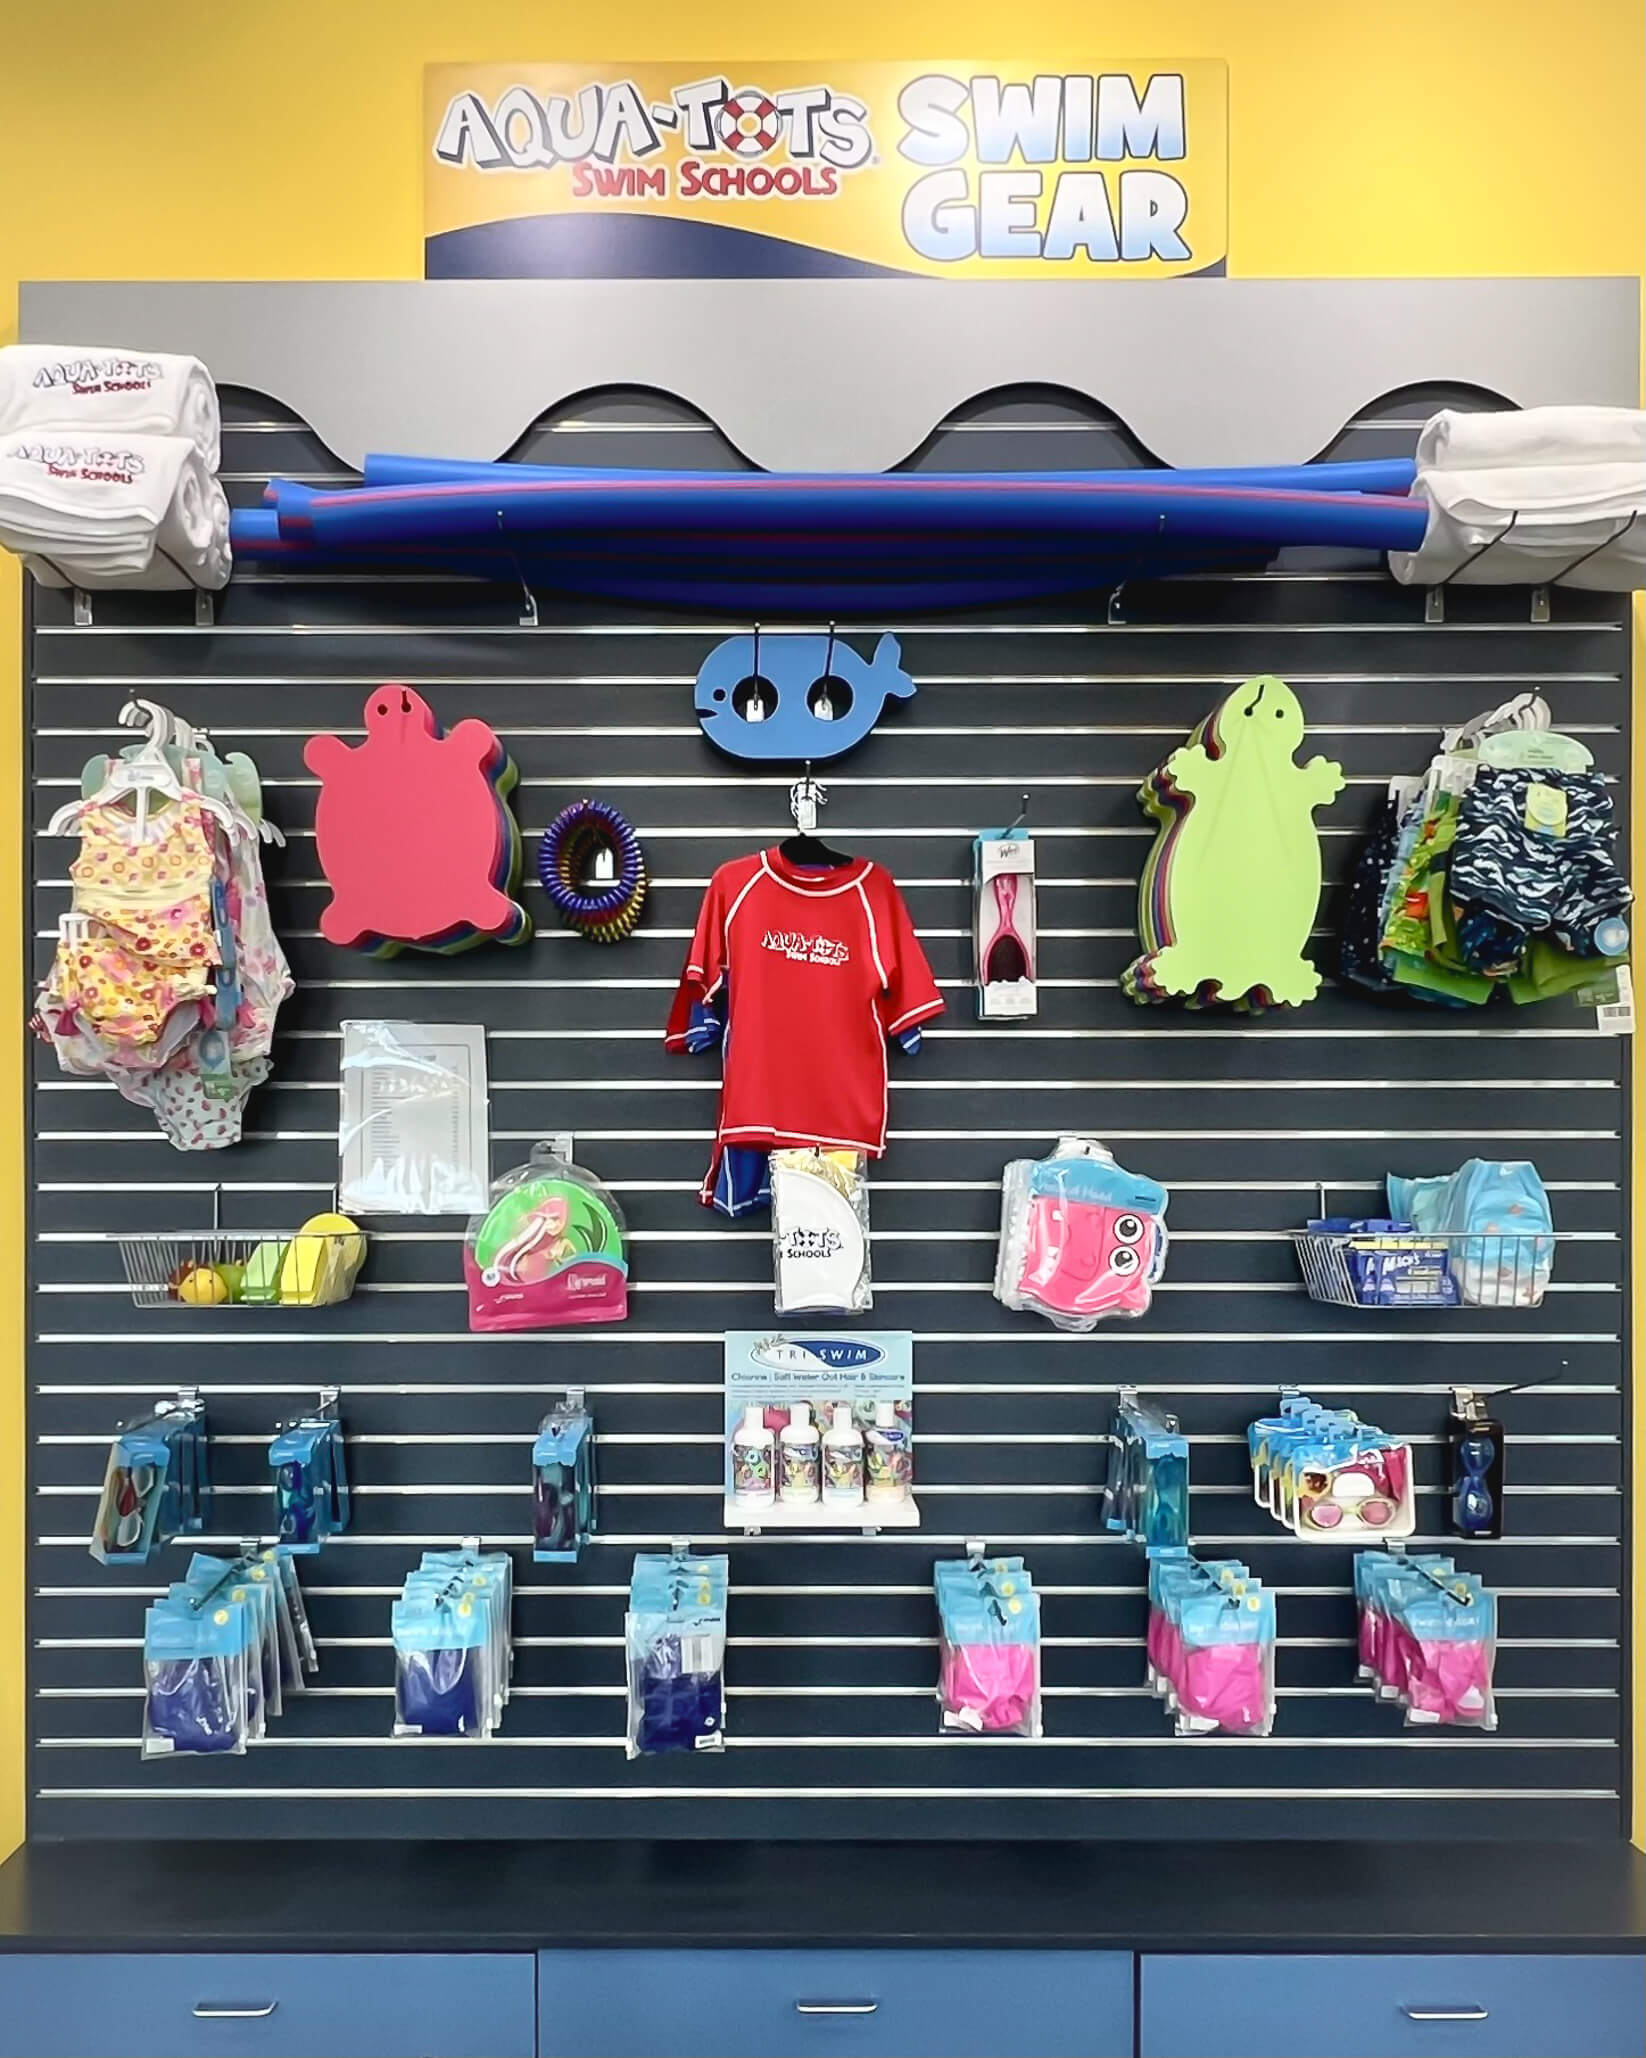 assortment of items for purchase at Aqua tots North McKinney